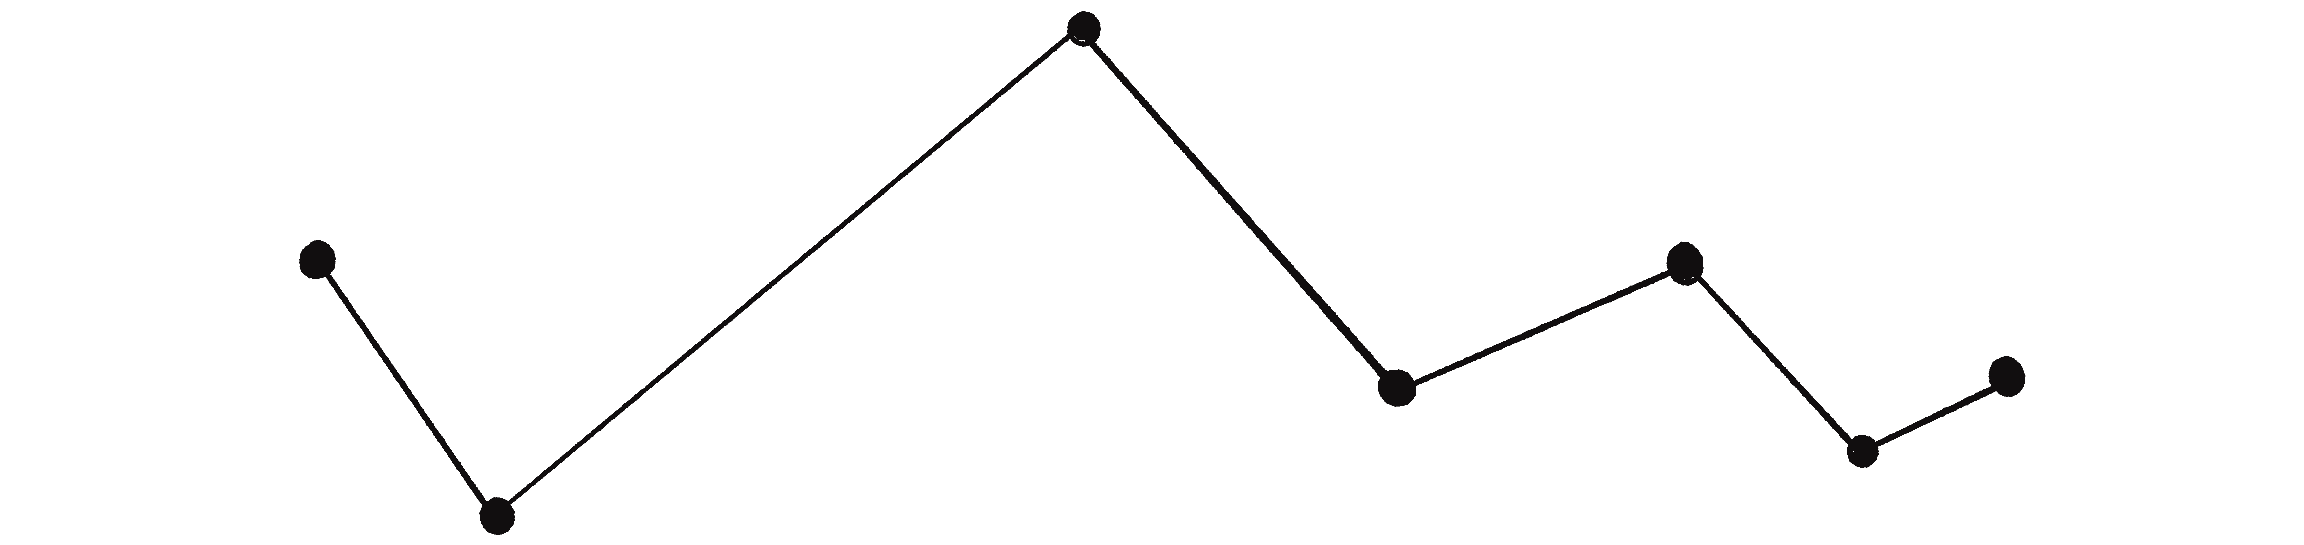 Figure 5.30: The same curved path, but approximated as connected line segments